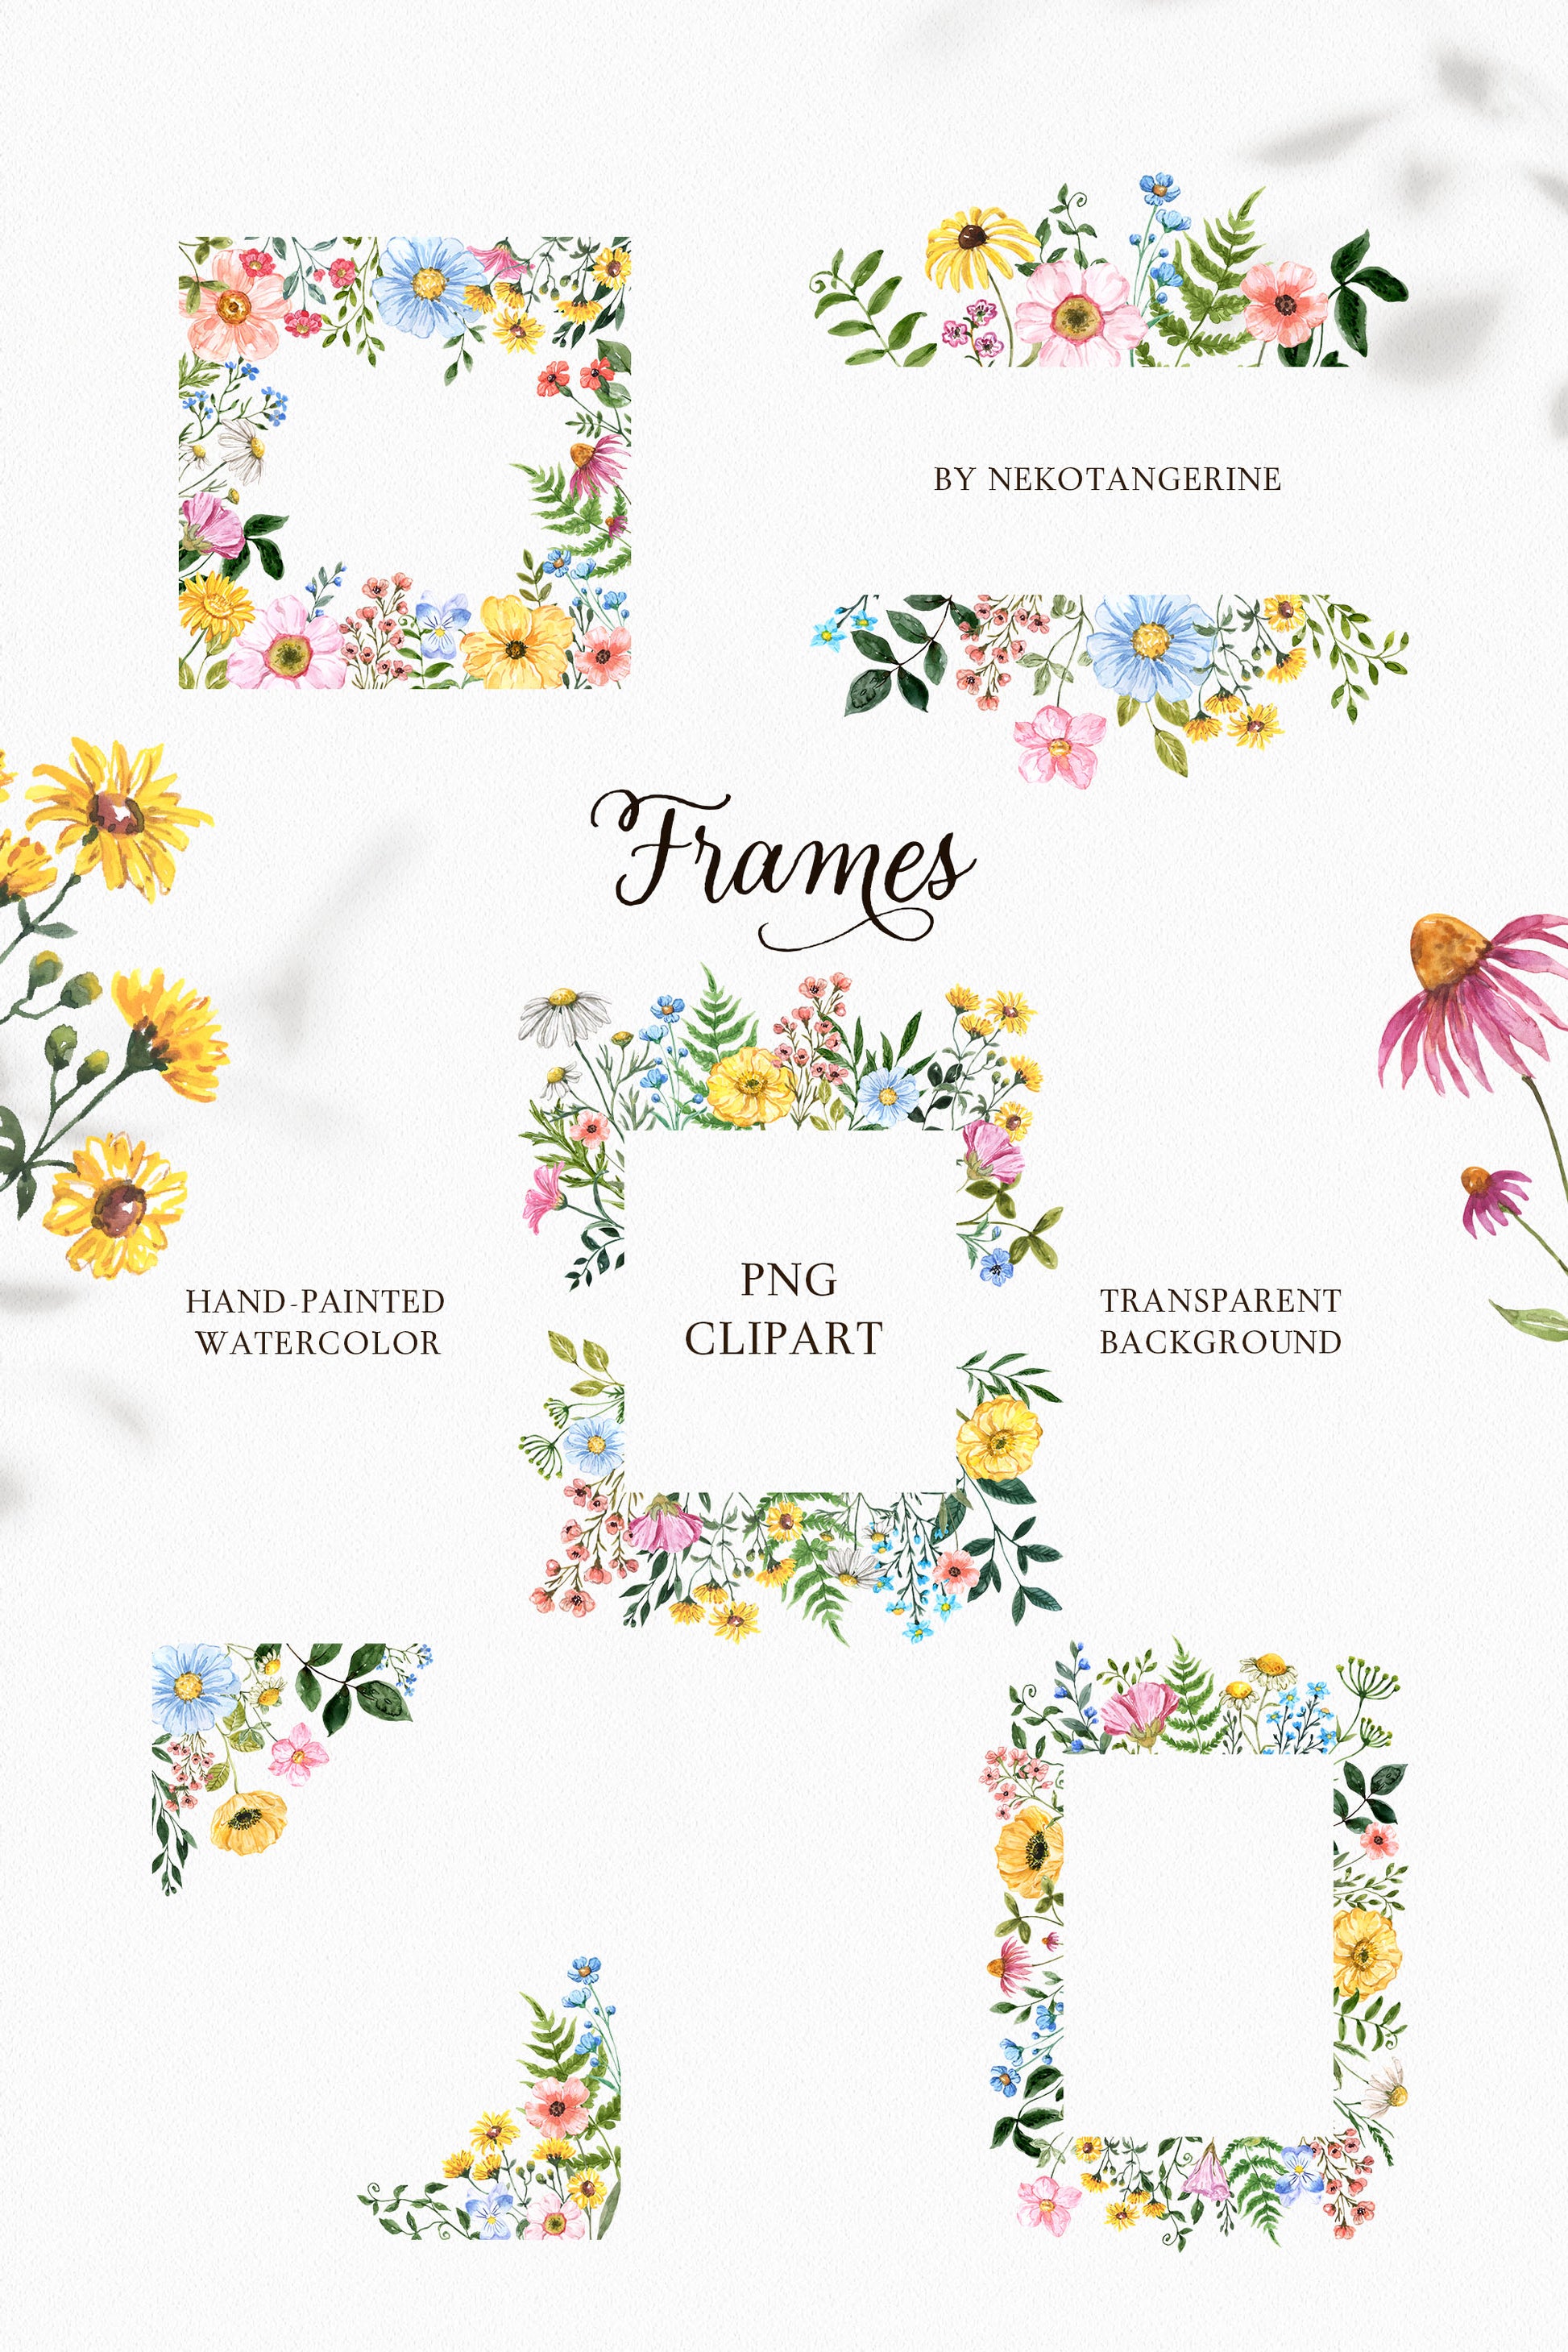 Watercolor Boho Wildflowers Frames and Wreaths clipart, watercolor wildflower clipart, wild flower frame clip art, wildflowers wedding invitation templatee